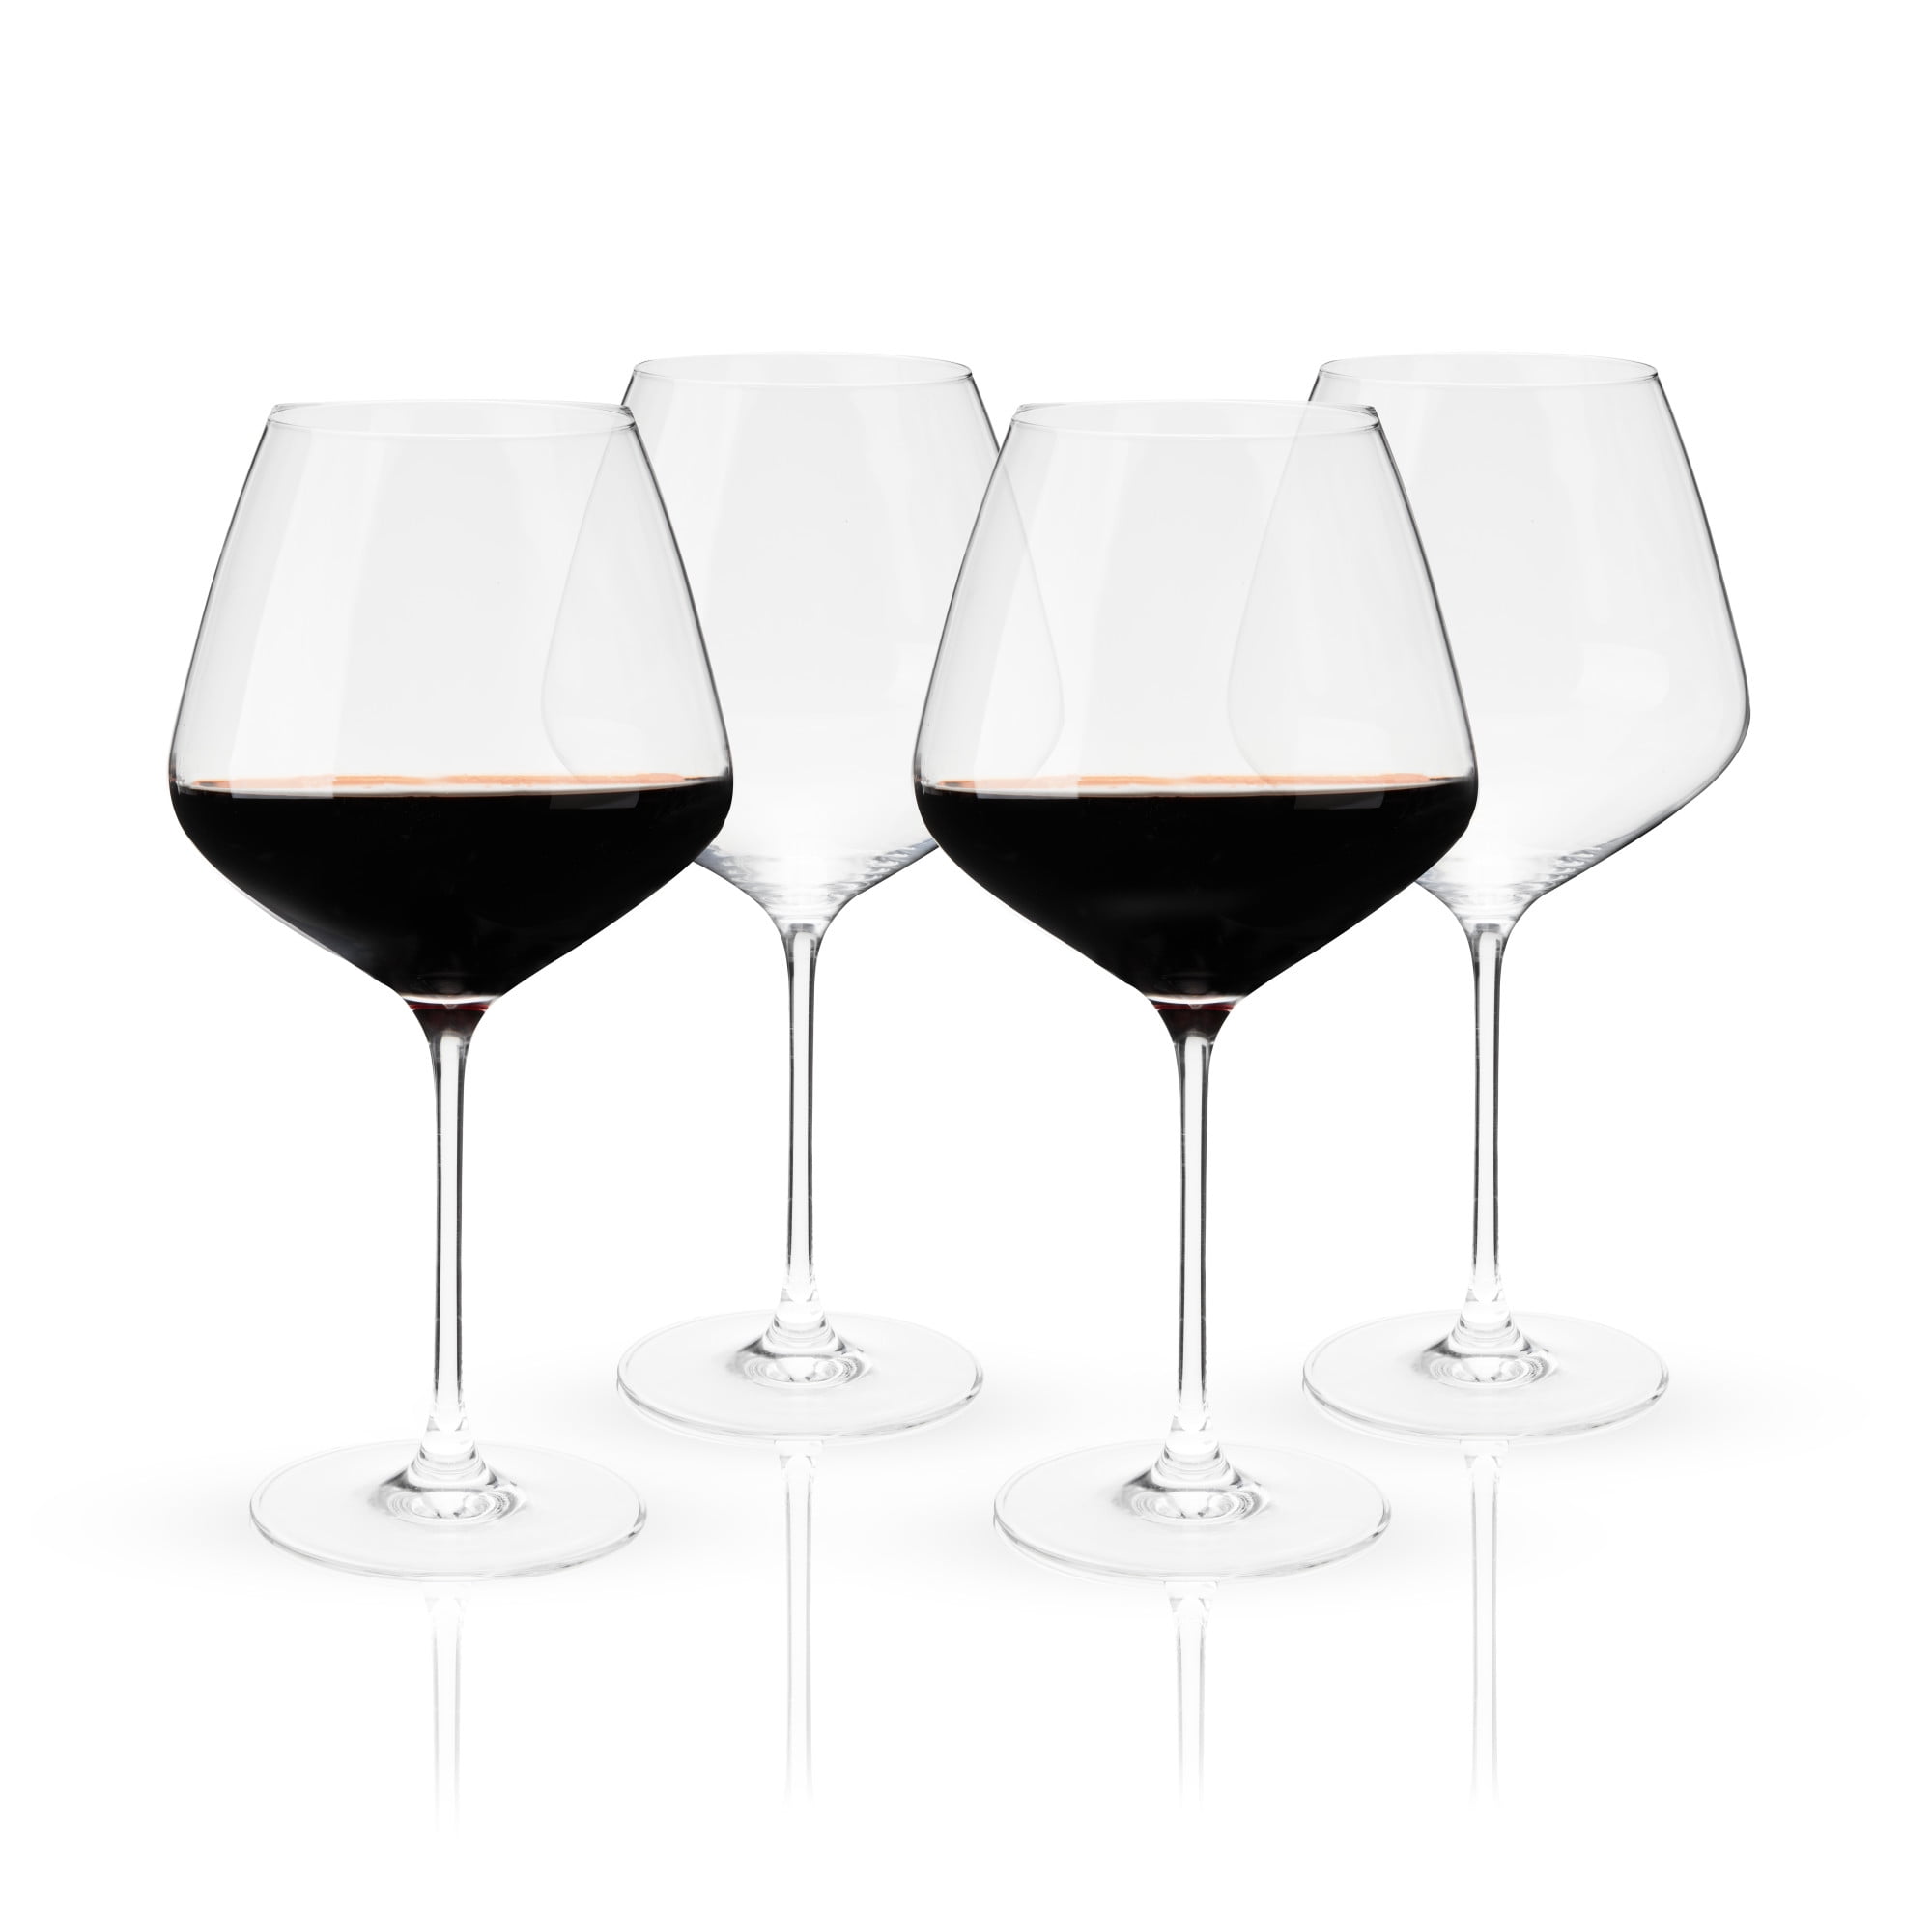 True Stemmed Wine Glasses, Lead-free Crystal Glassware For Red And